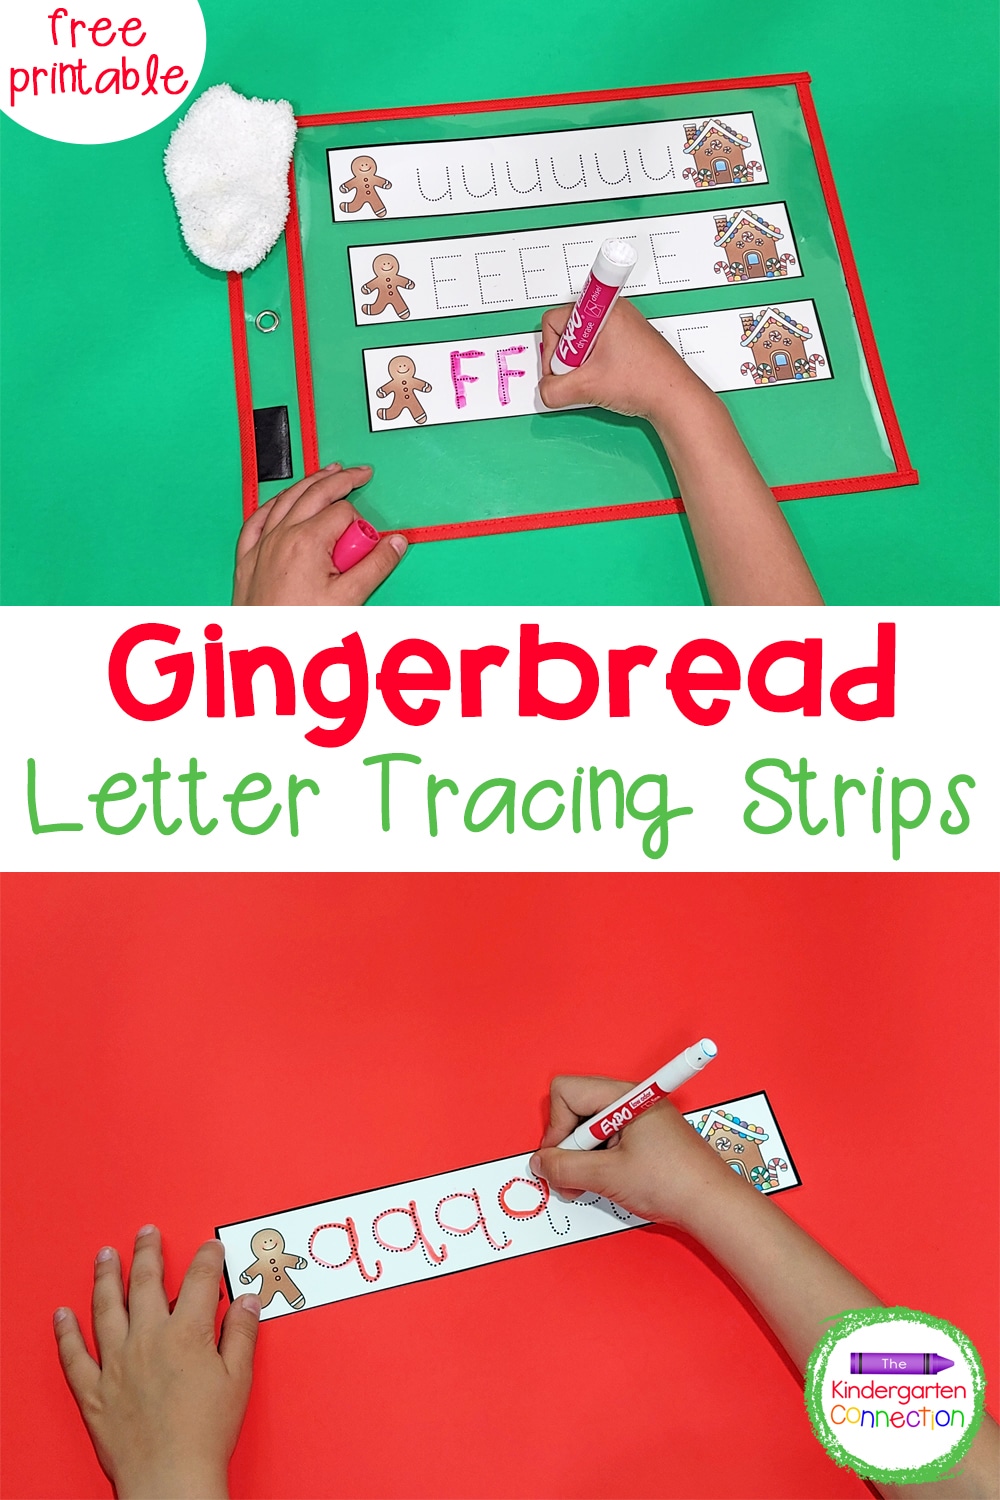 Gingerbread Letter Tracing Activity